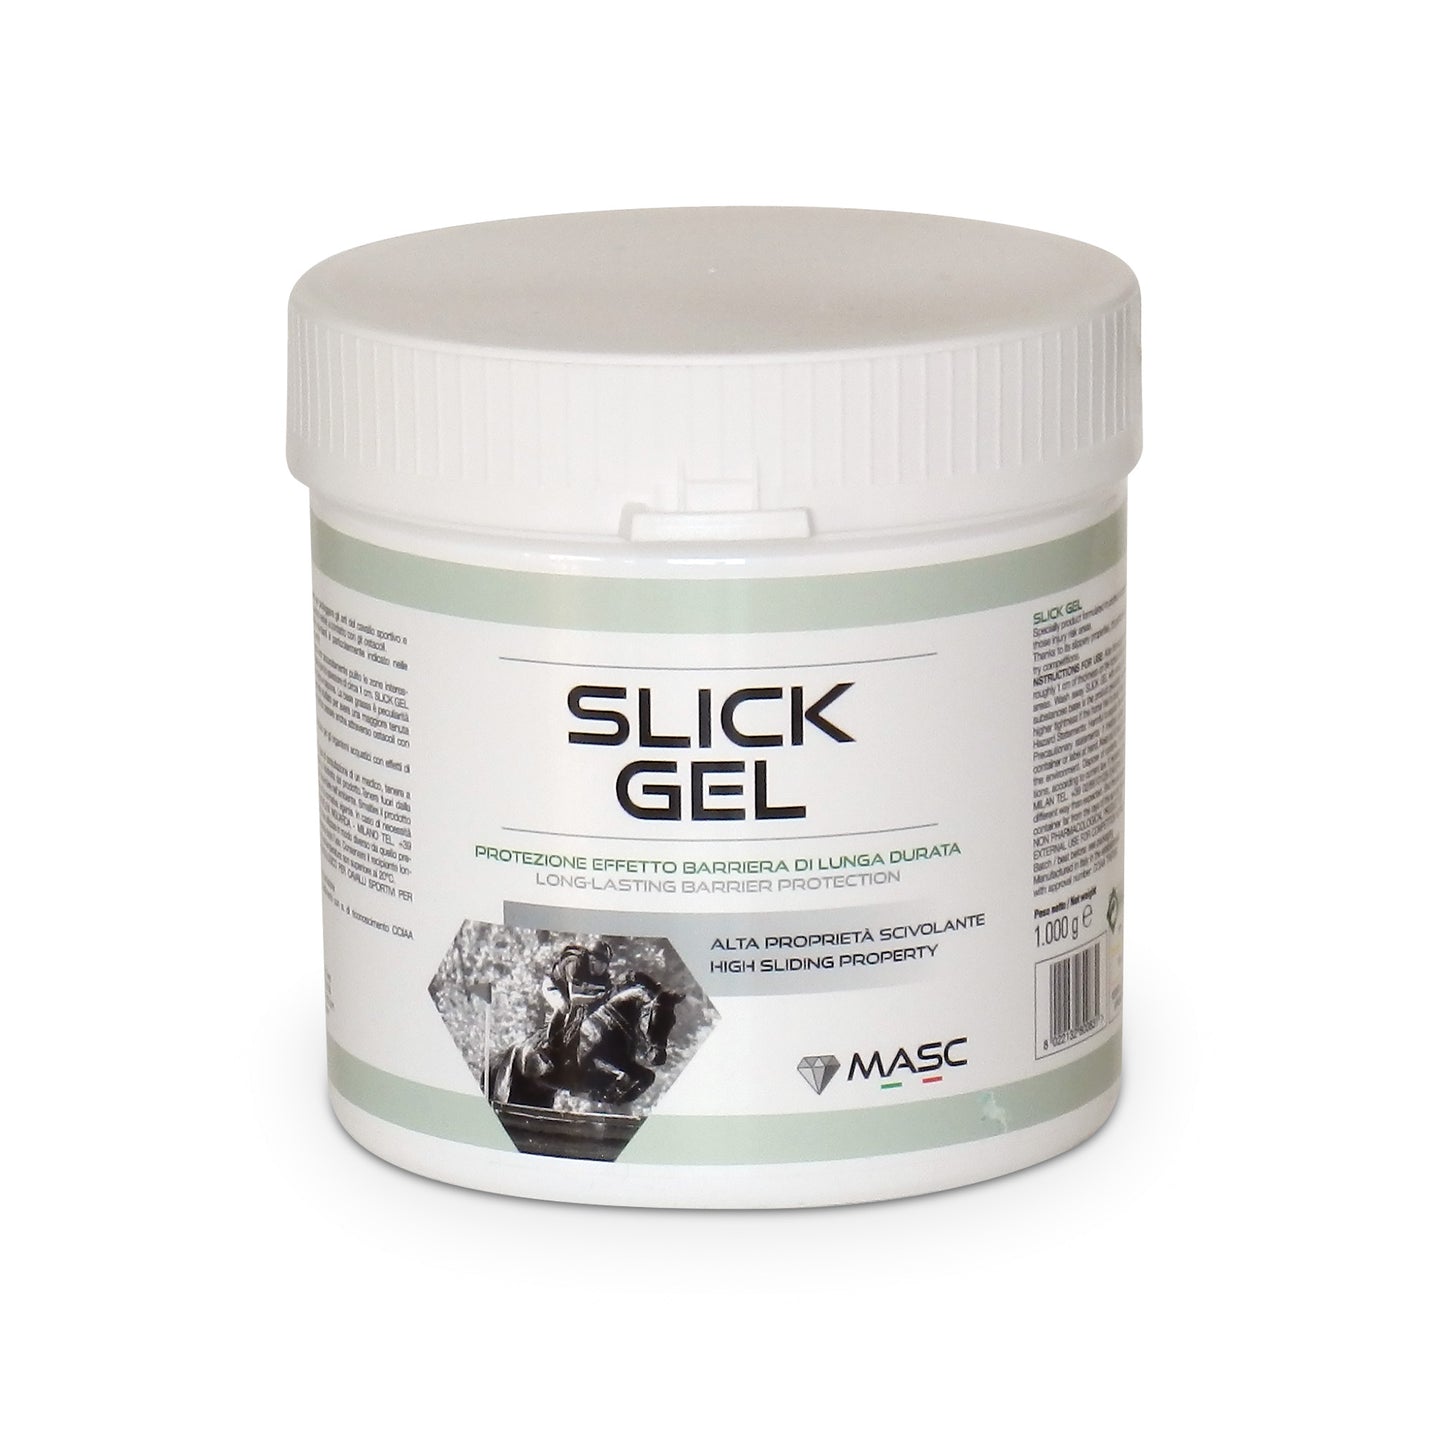 Slick Gel | Long-lasting Protection for Horse's Limbs and Obstacle-Contact Areas